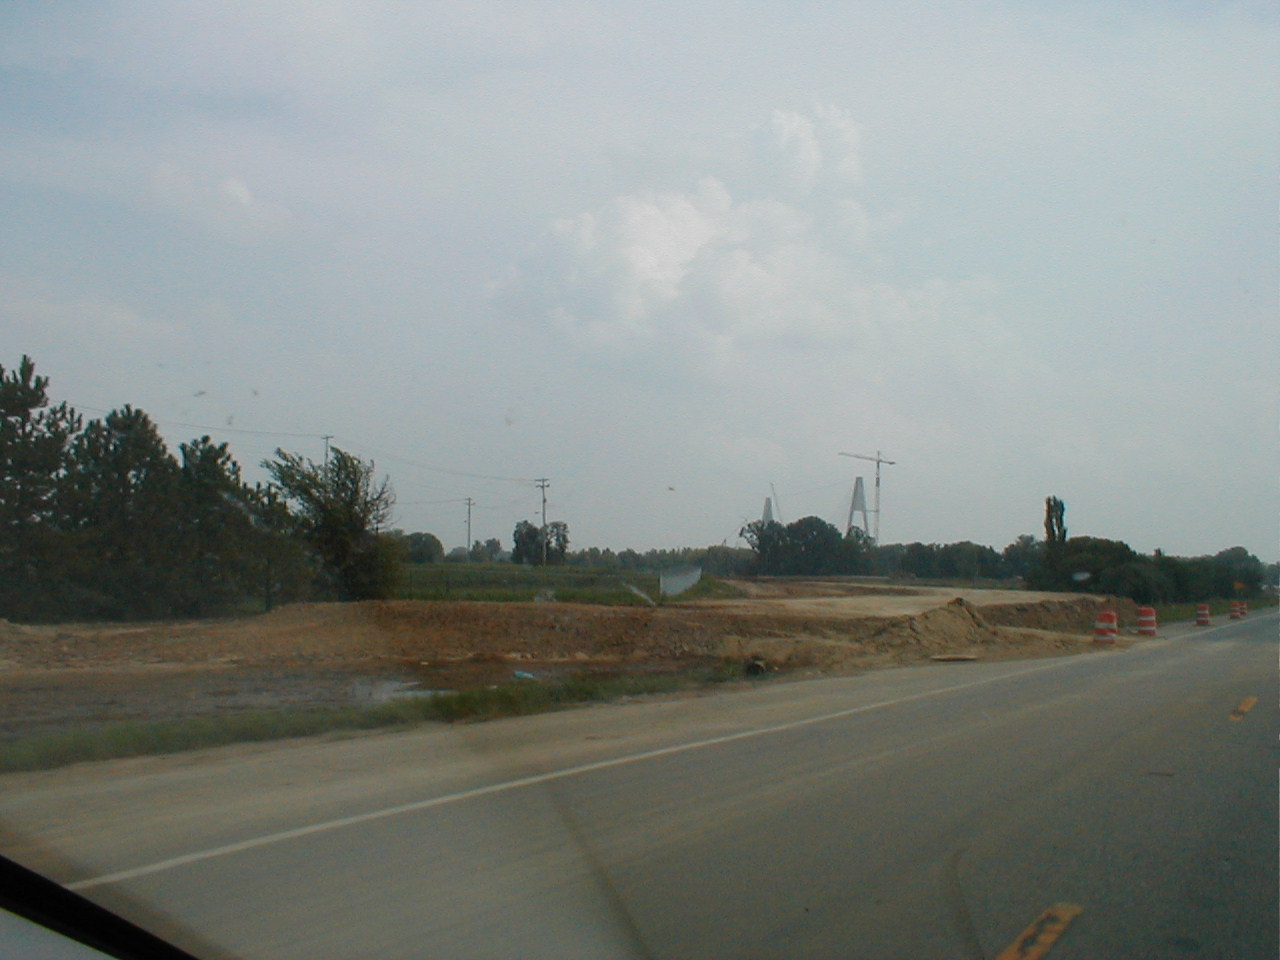 Facing south on US 231 towards the bridge. Both towers are visible as are ramps for the new interchange.